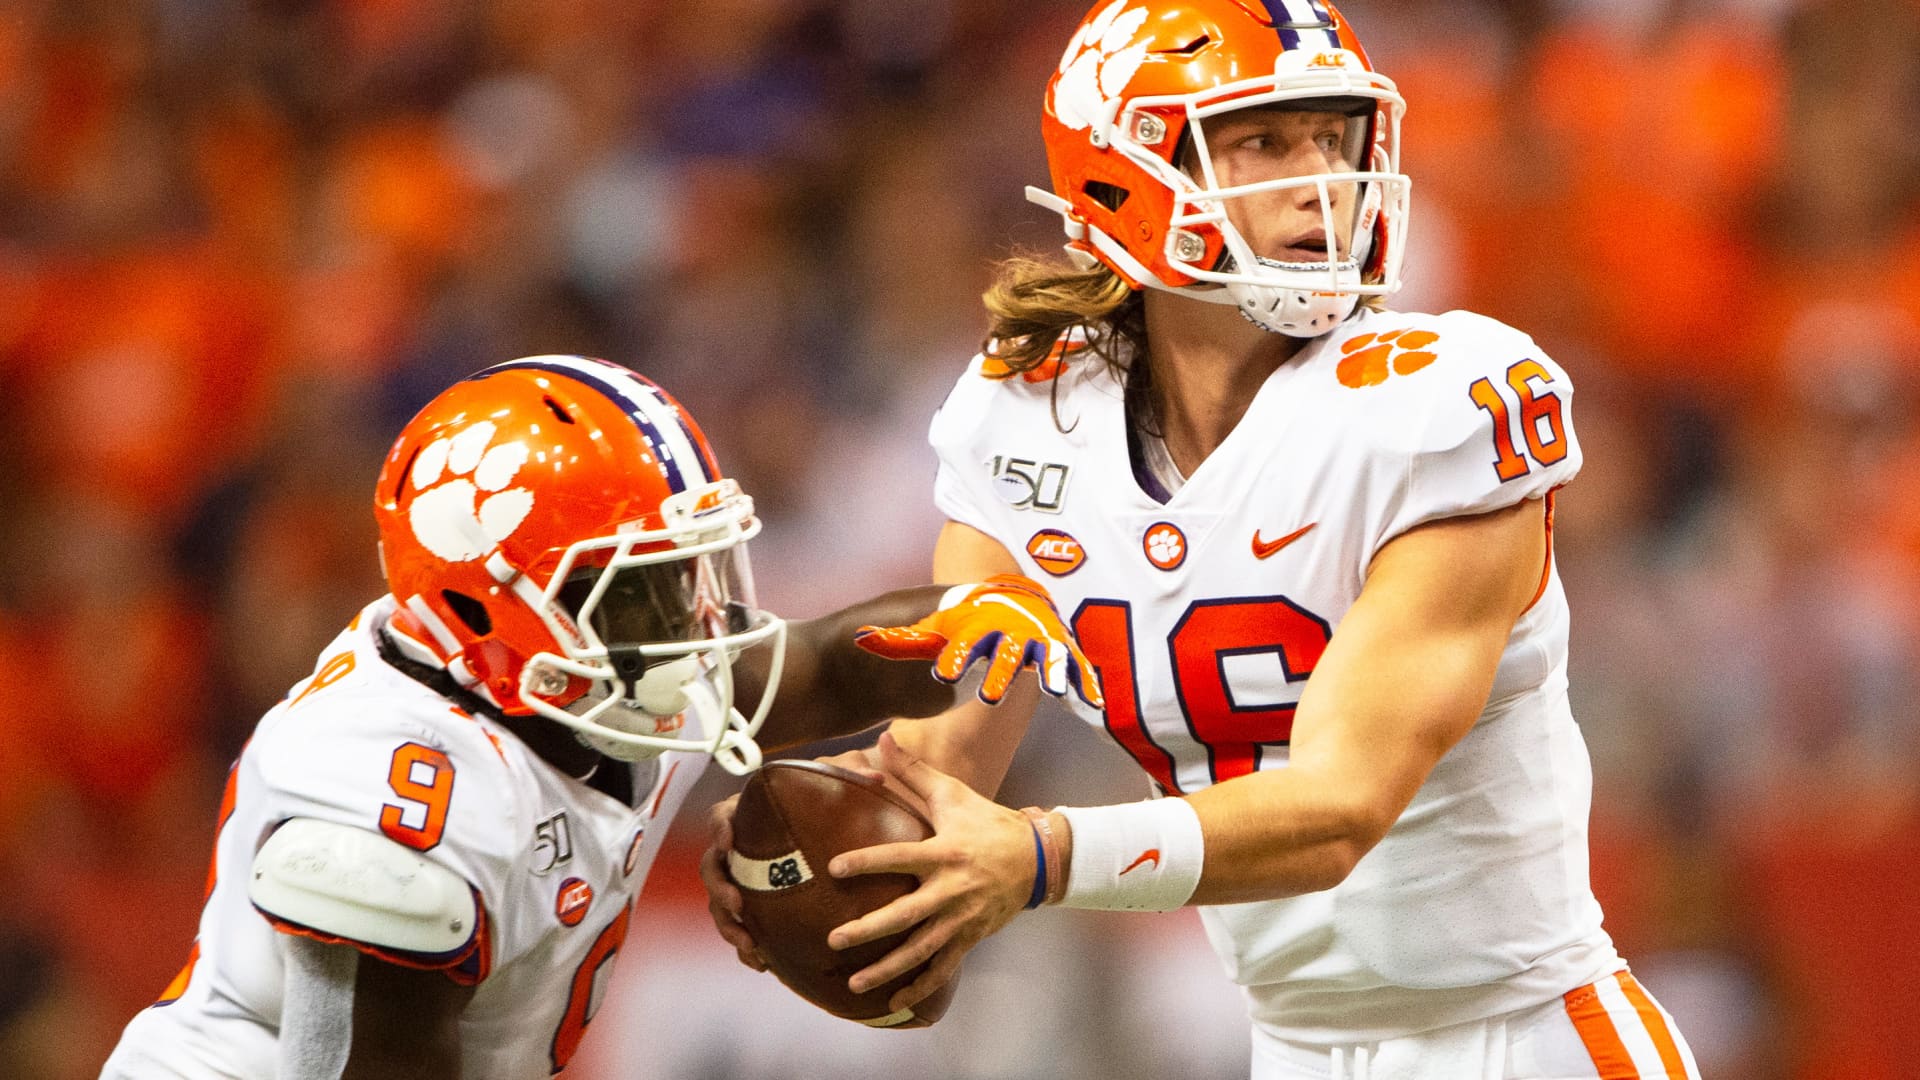 Clemson Tigers Quarterback Trevor Lawrence (16) fakes a handoff to Clemson Tigers Running Back Travis Etienne (9) during the first quarter of the game between the Clemson Tigers and the Syracuse Orange on September 14, 2019, at the Carrier Dome in Syracuse, NY.